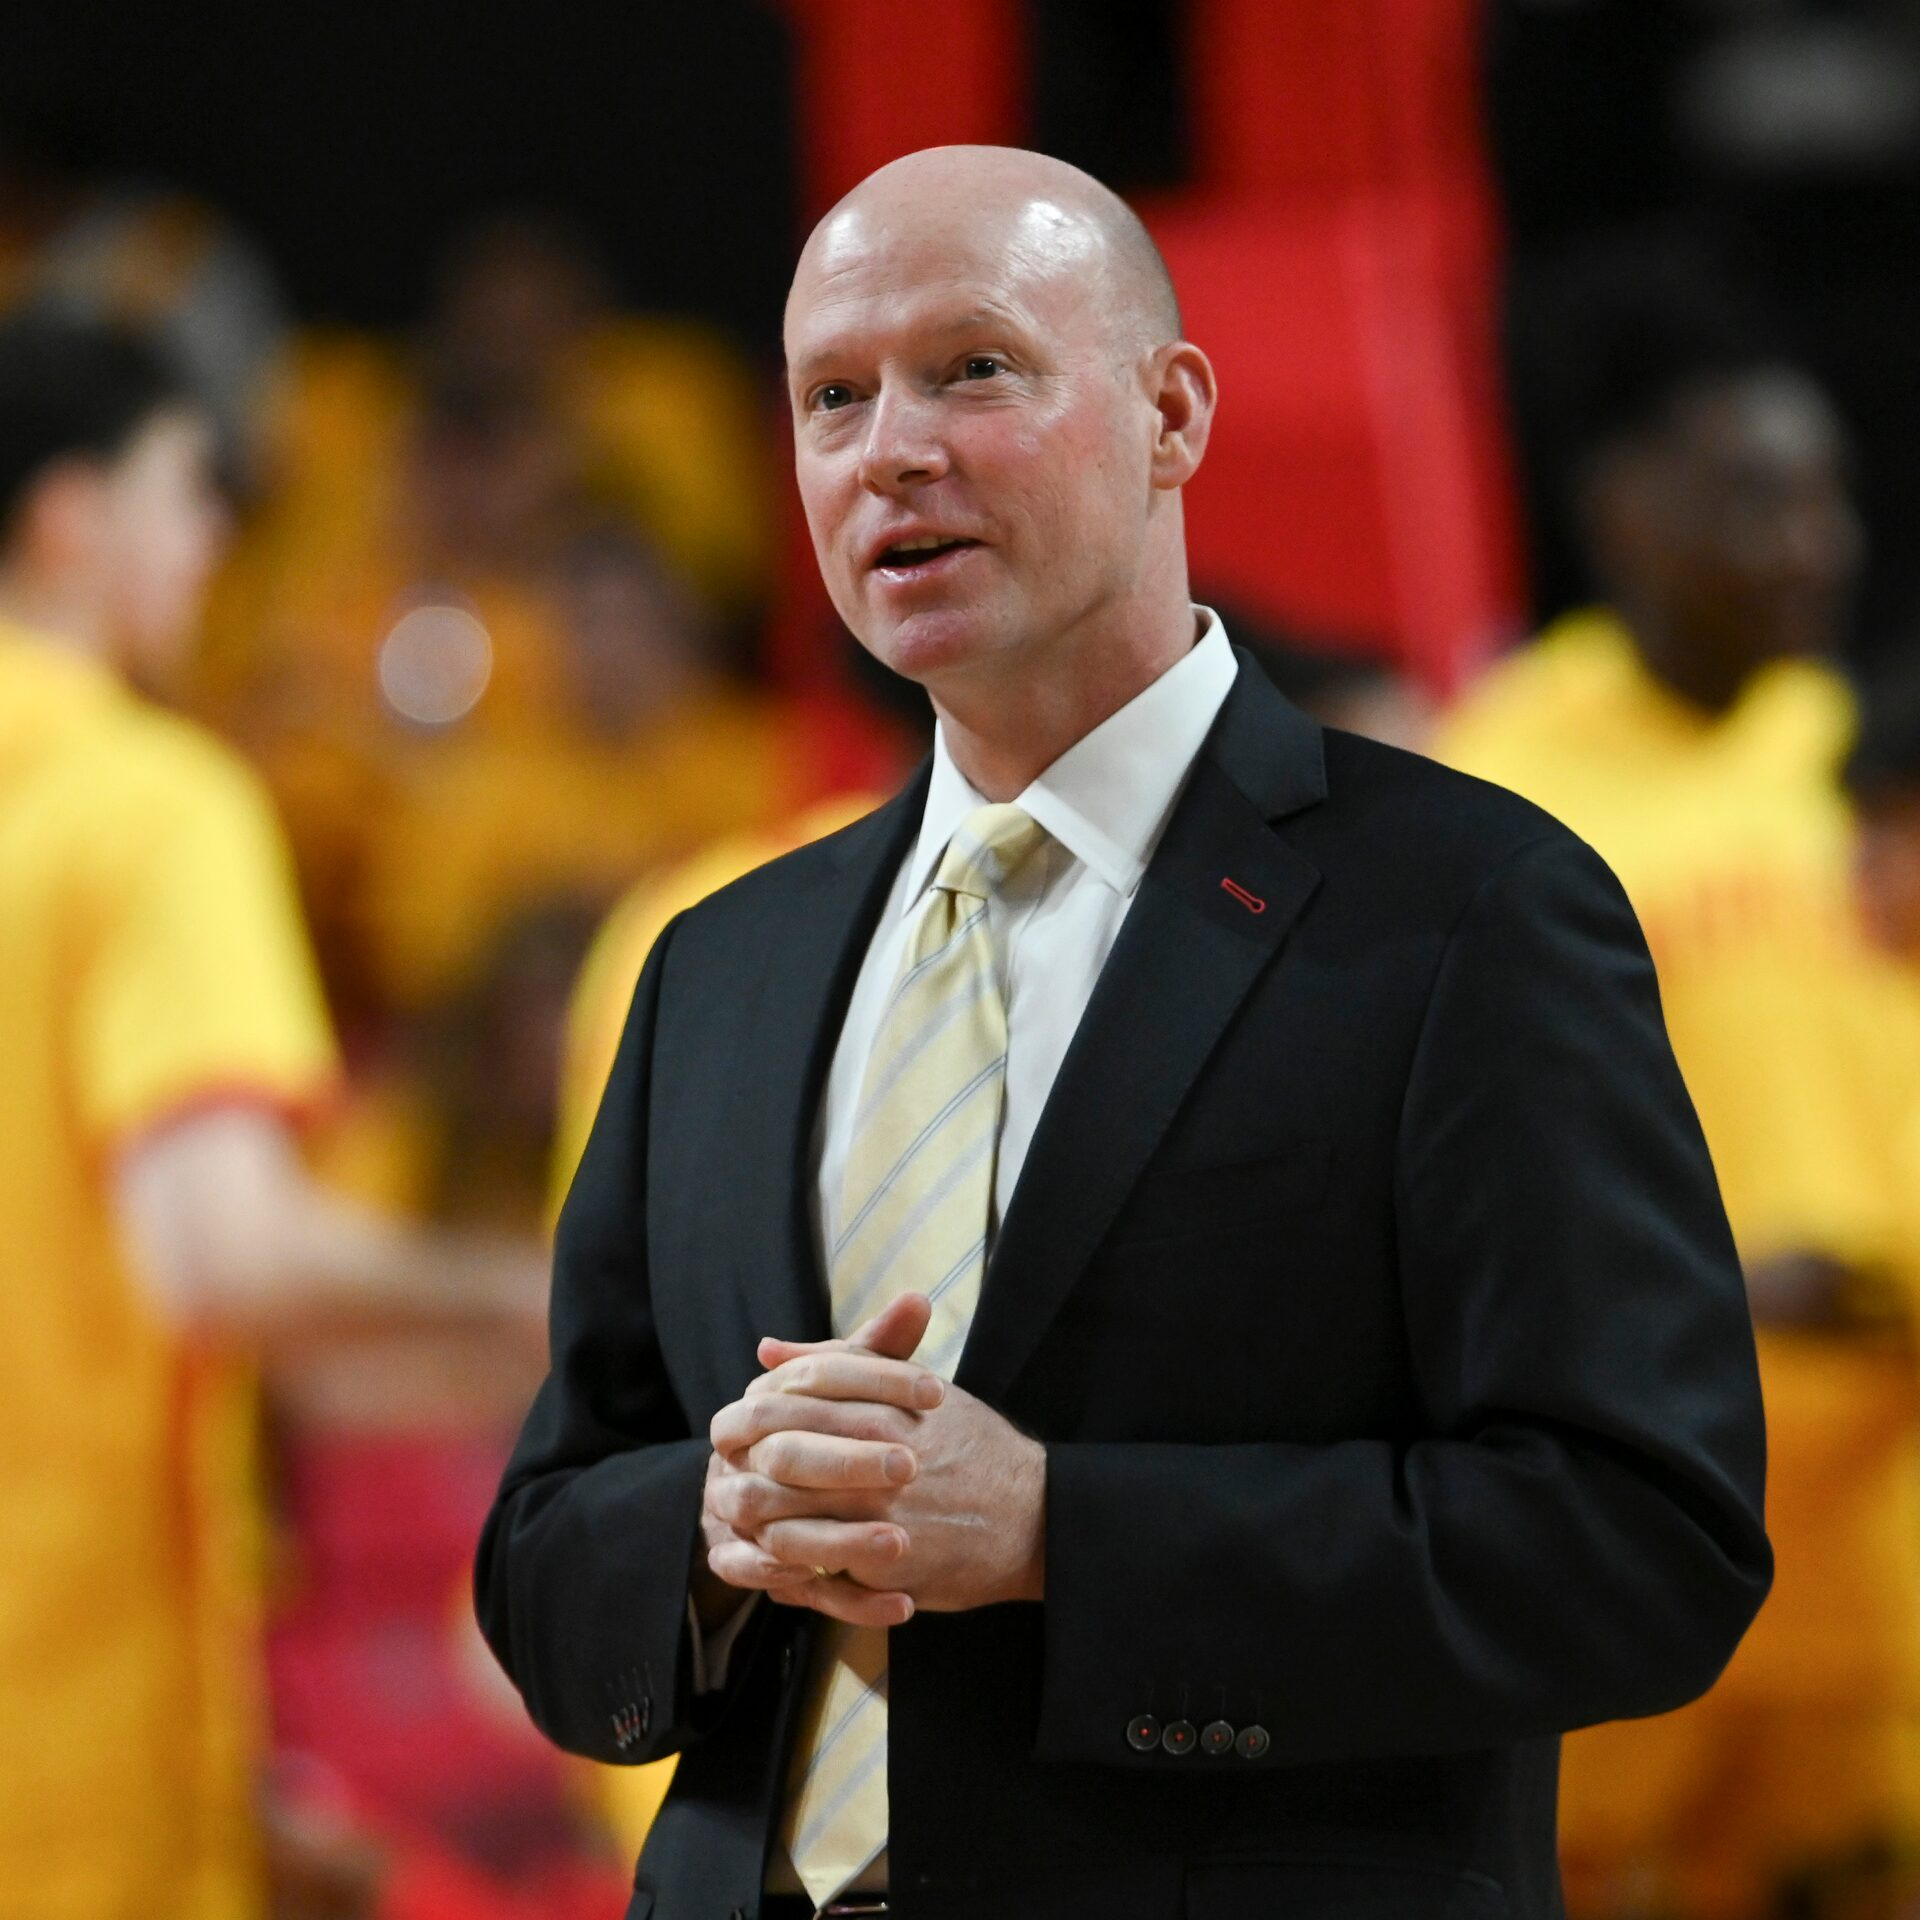 Do you approve of Kevin Willard's recent acquisitions for the Terps?